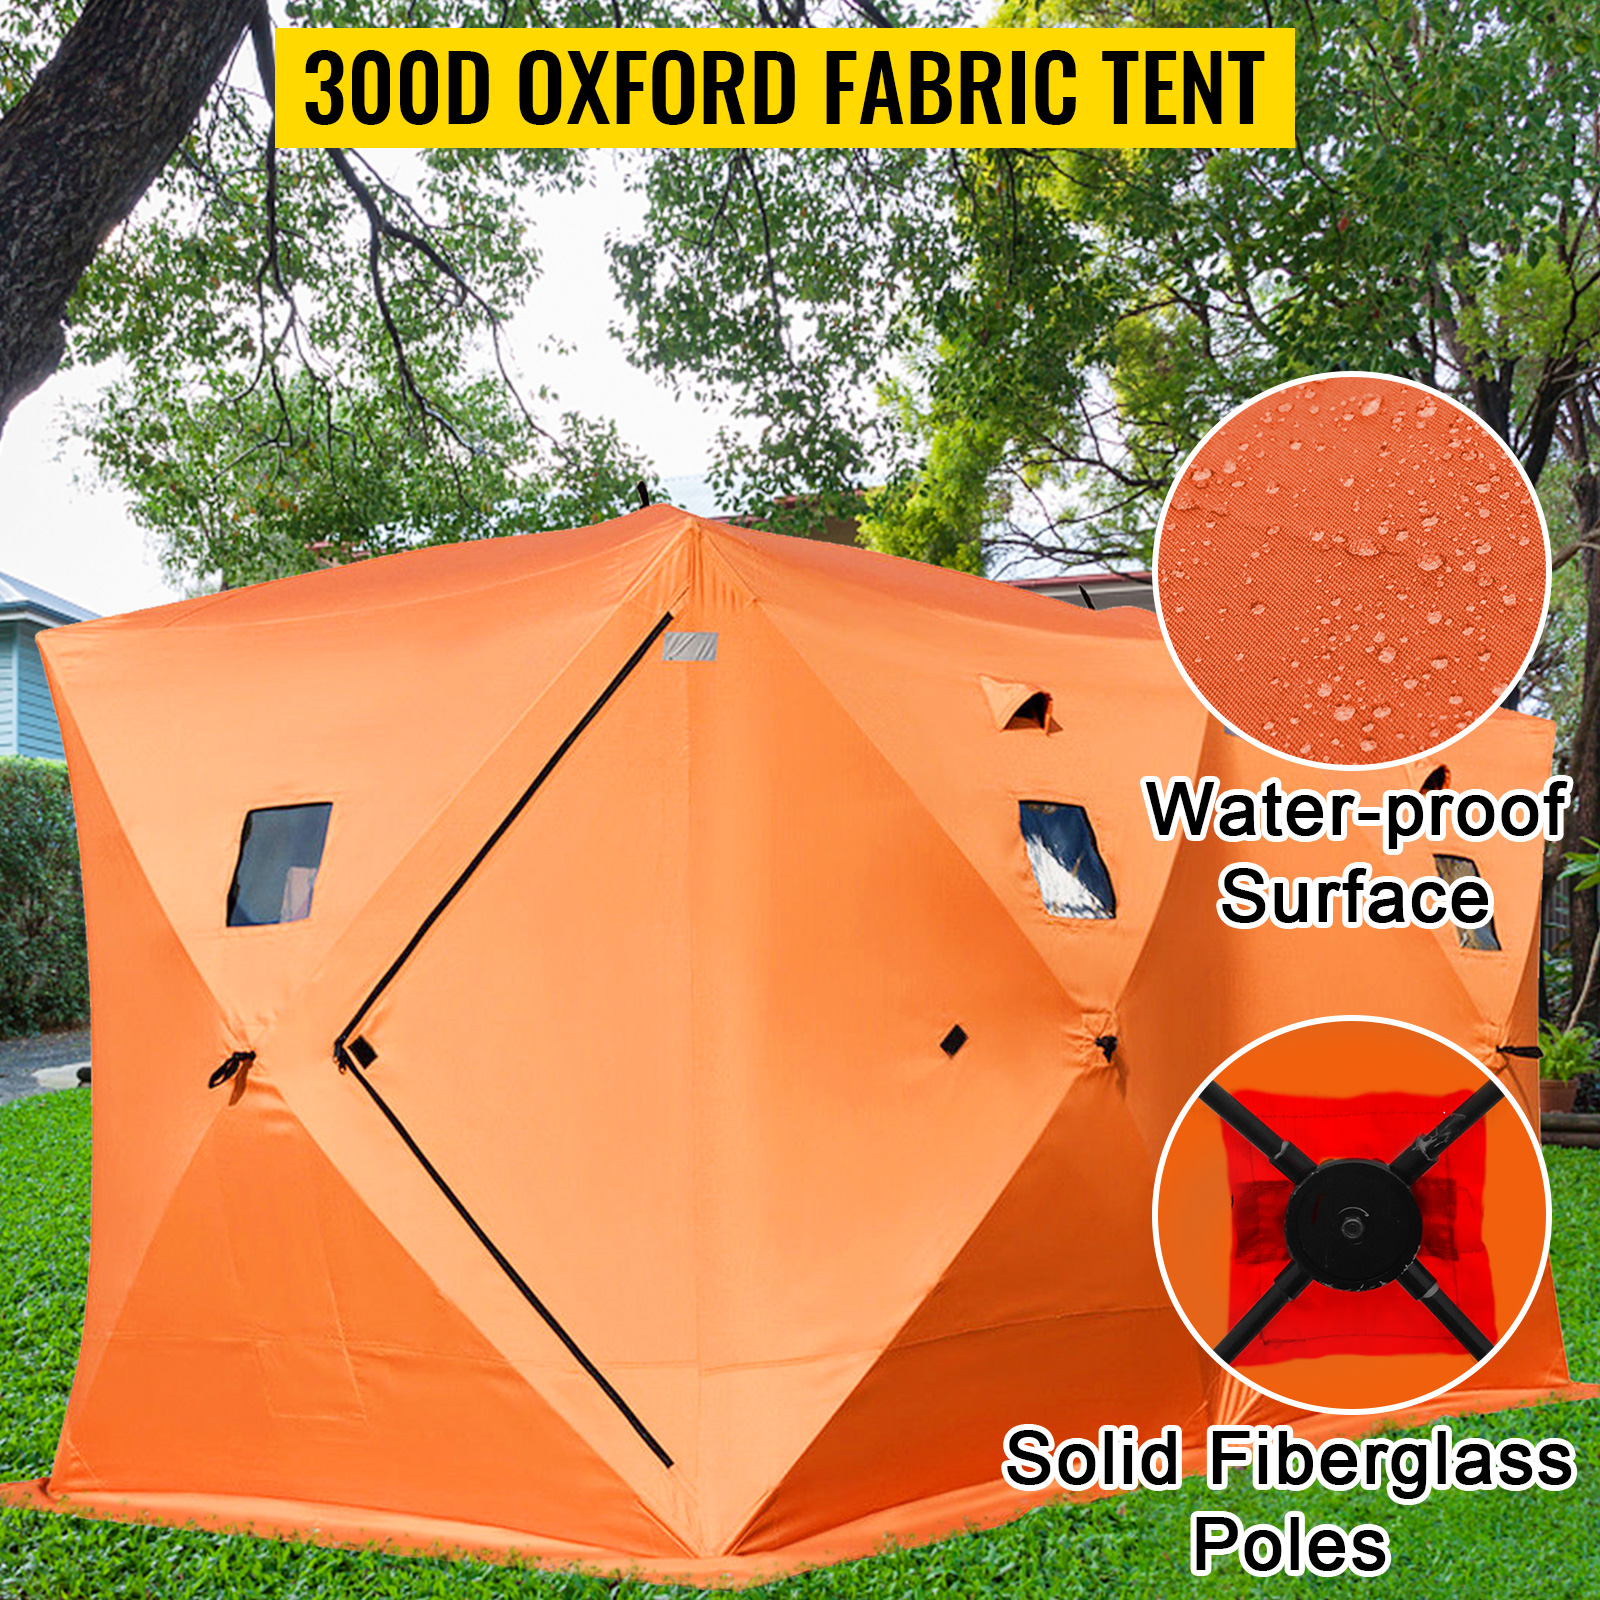 VEVOR 8 Person Ice Fishing Shelter Pop-Up Portable Insulated Ice Fishing Tent Waterproof Oxford Fabric Orange